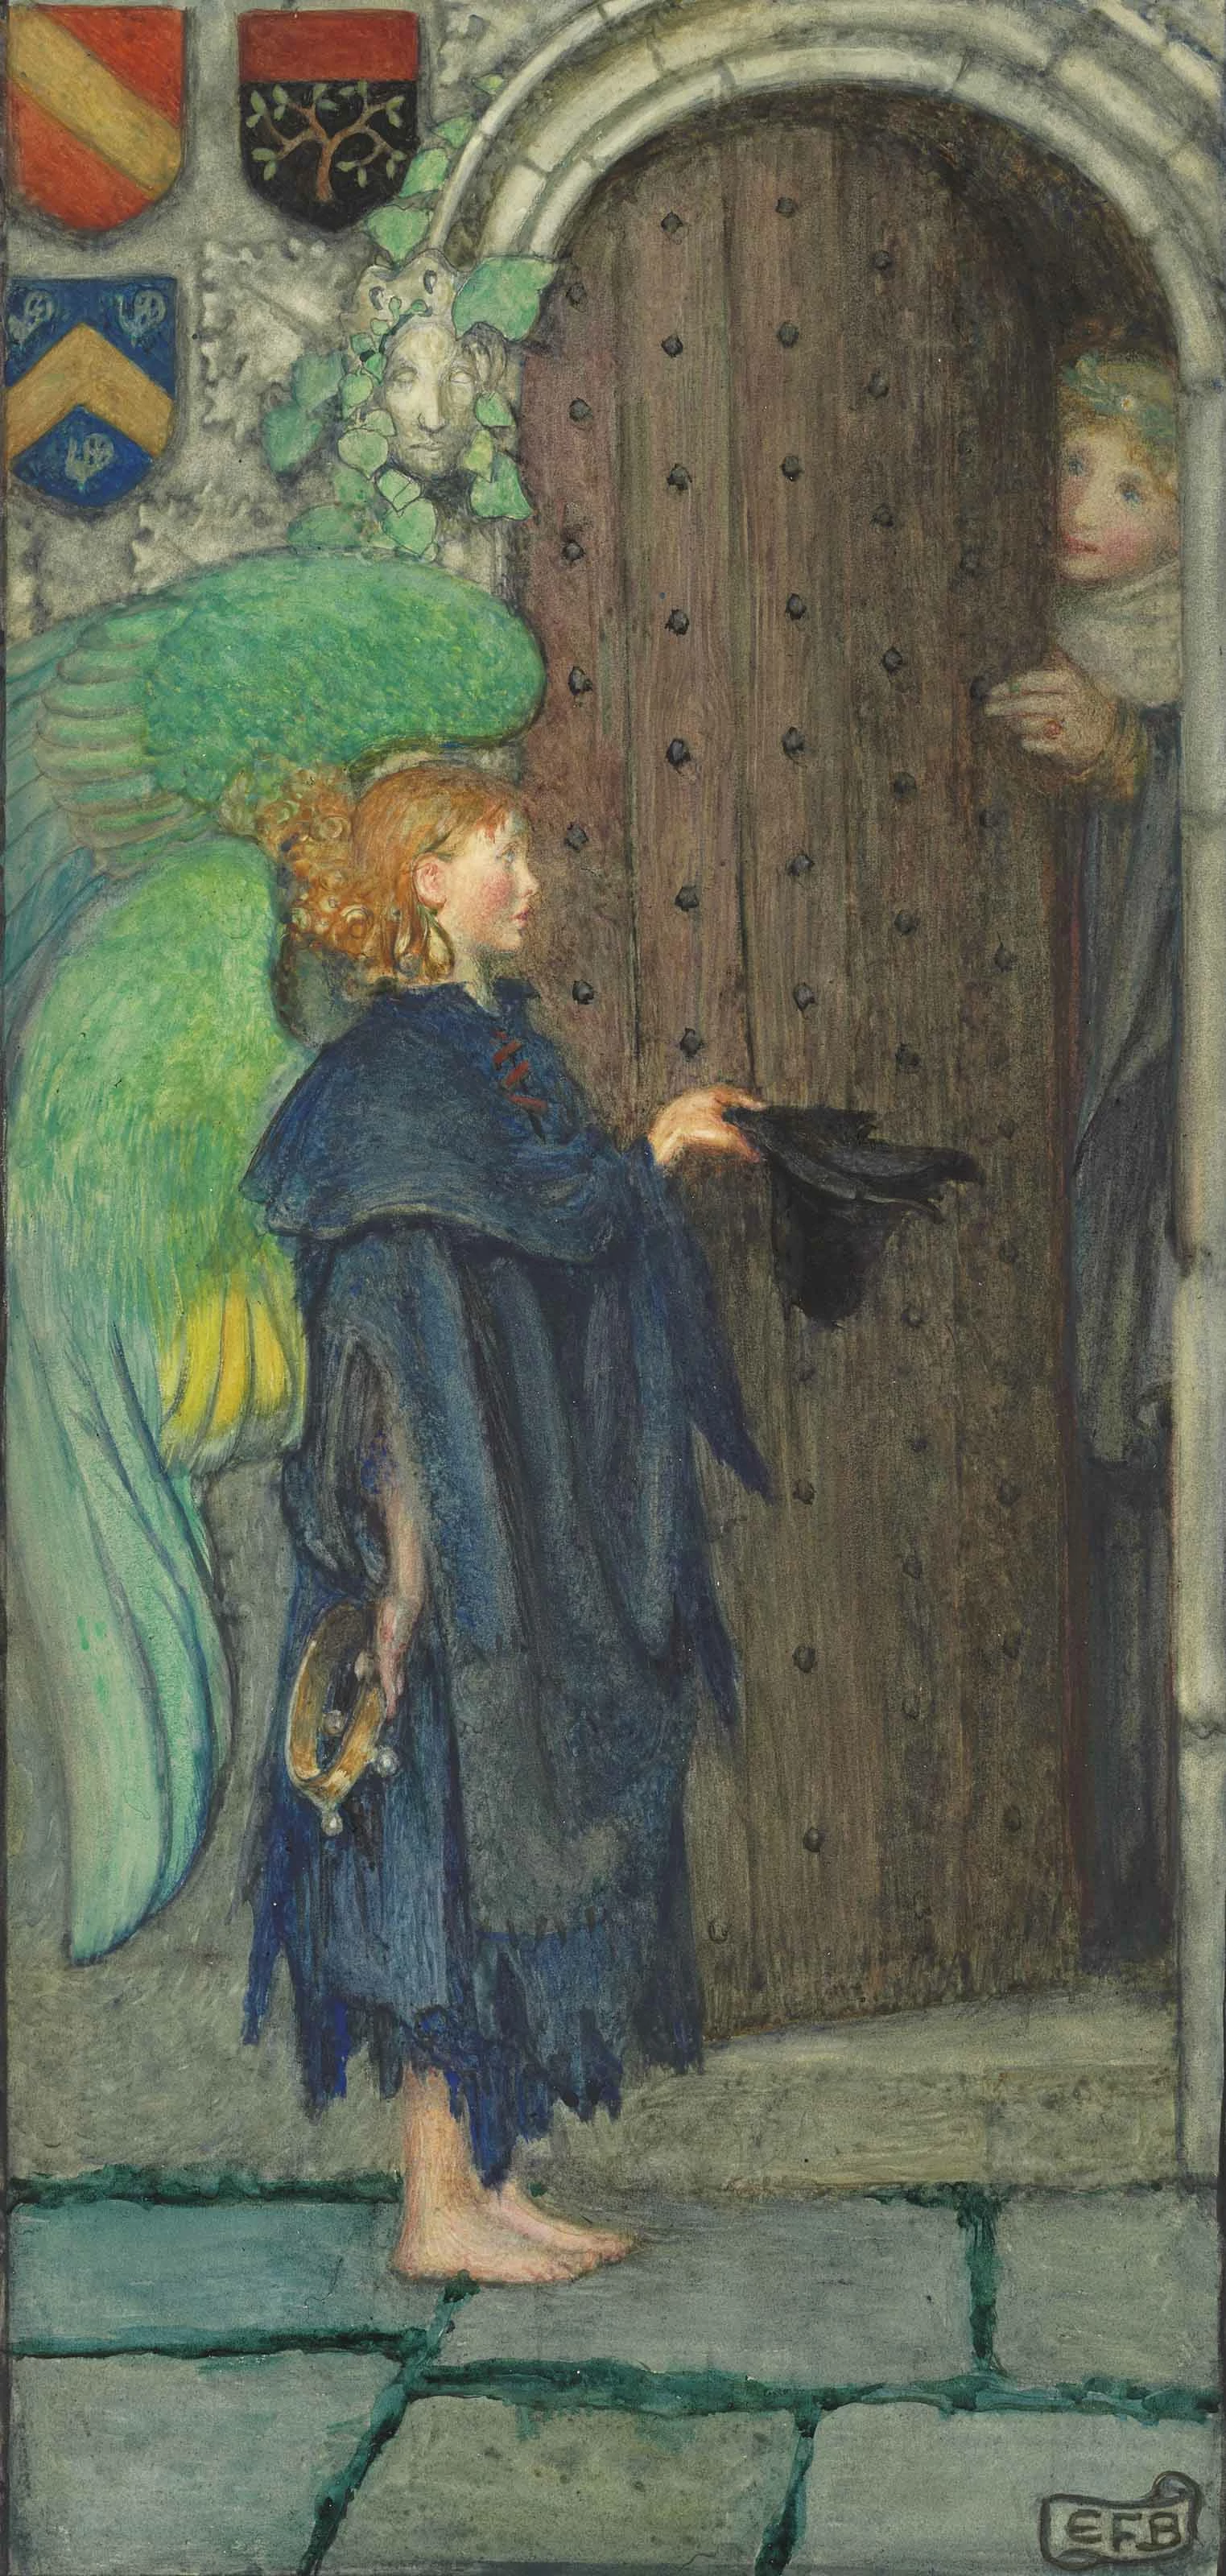 Some have entertained angels unawares, Eleanor Fortescue-Brickdale